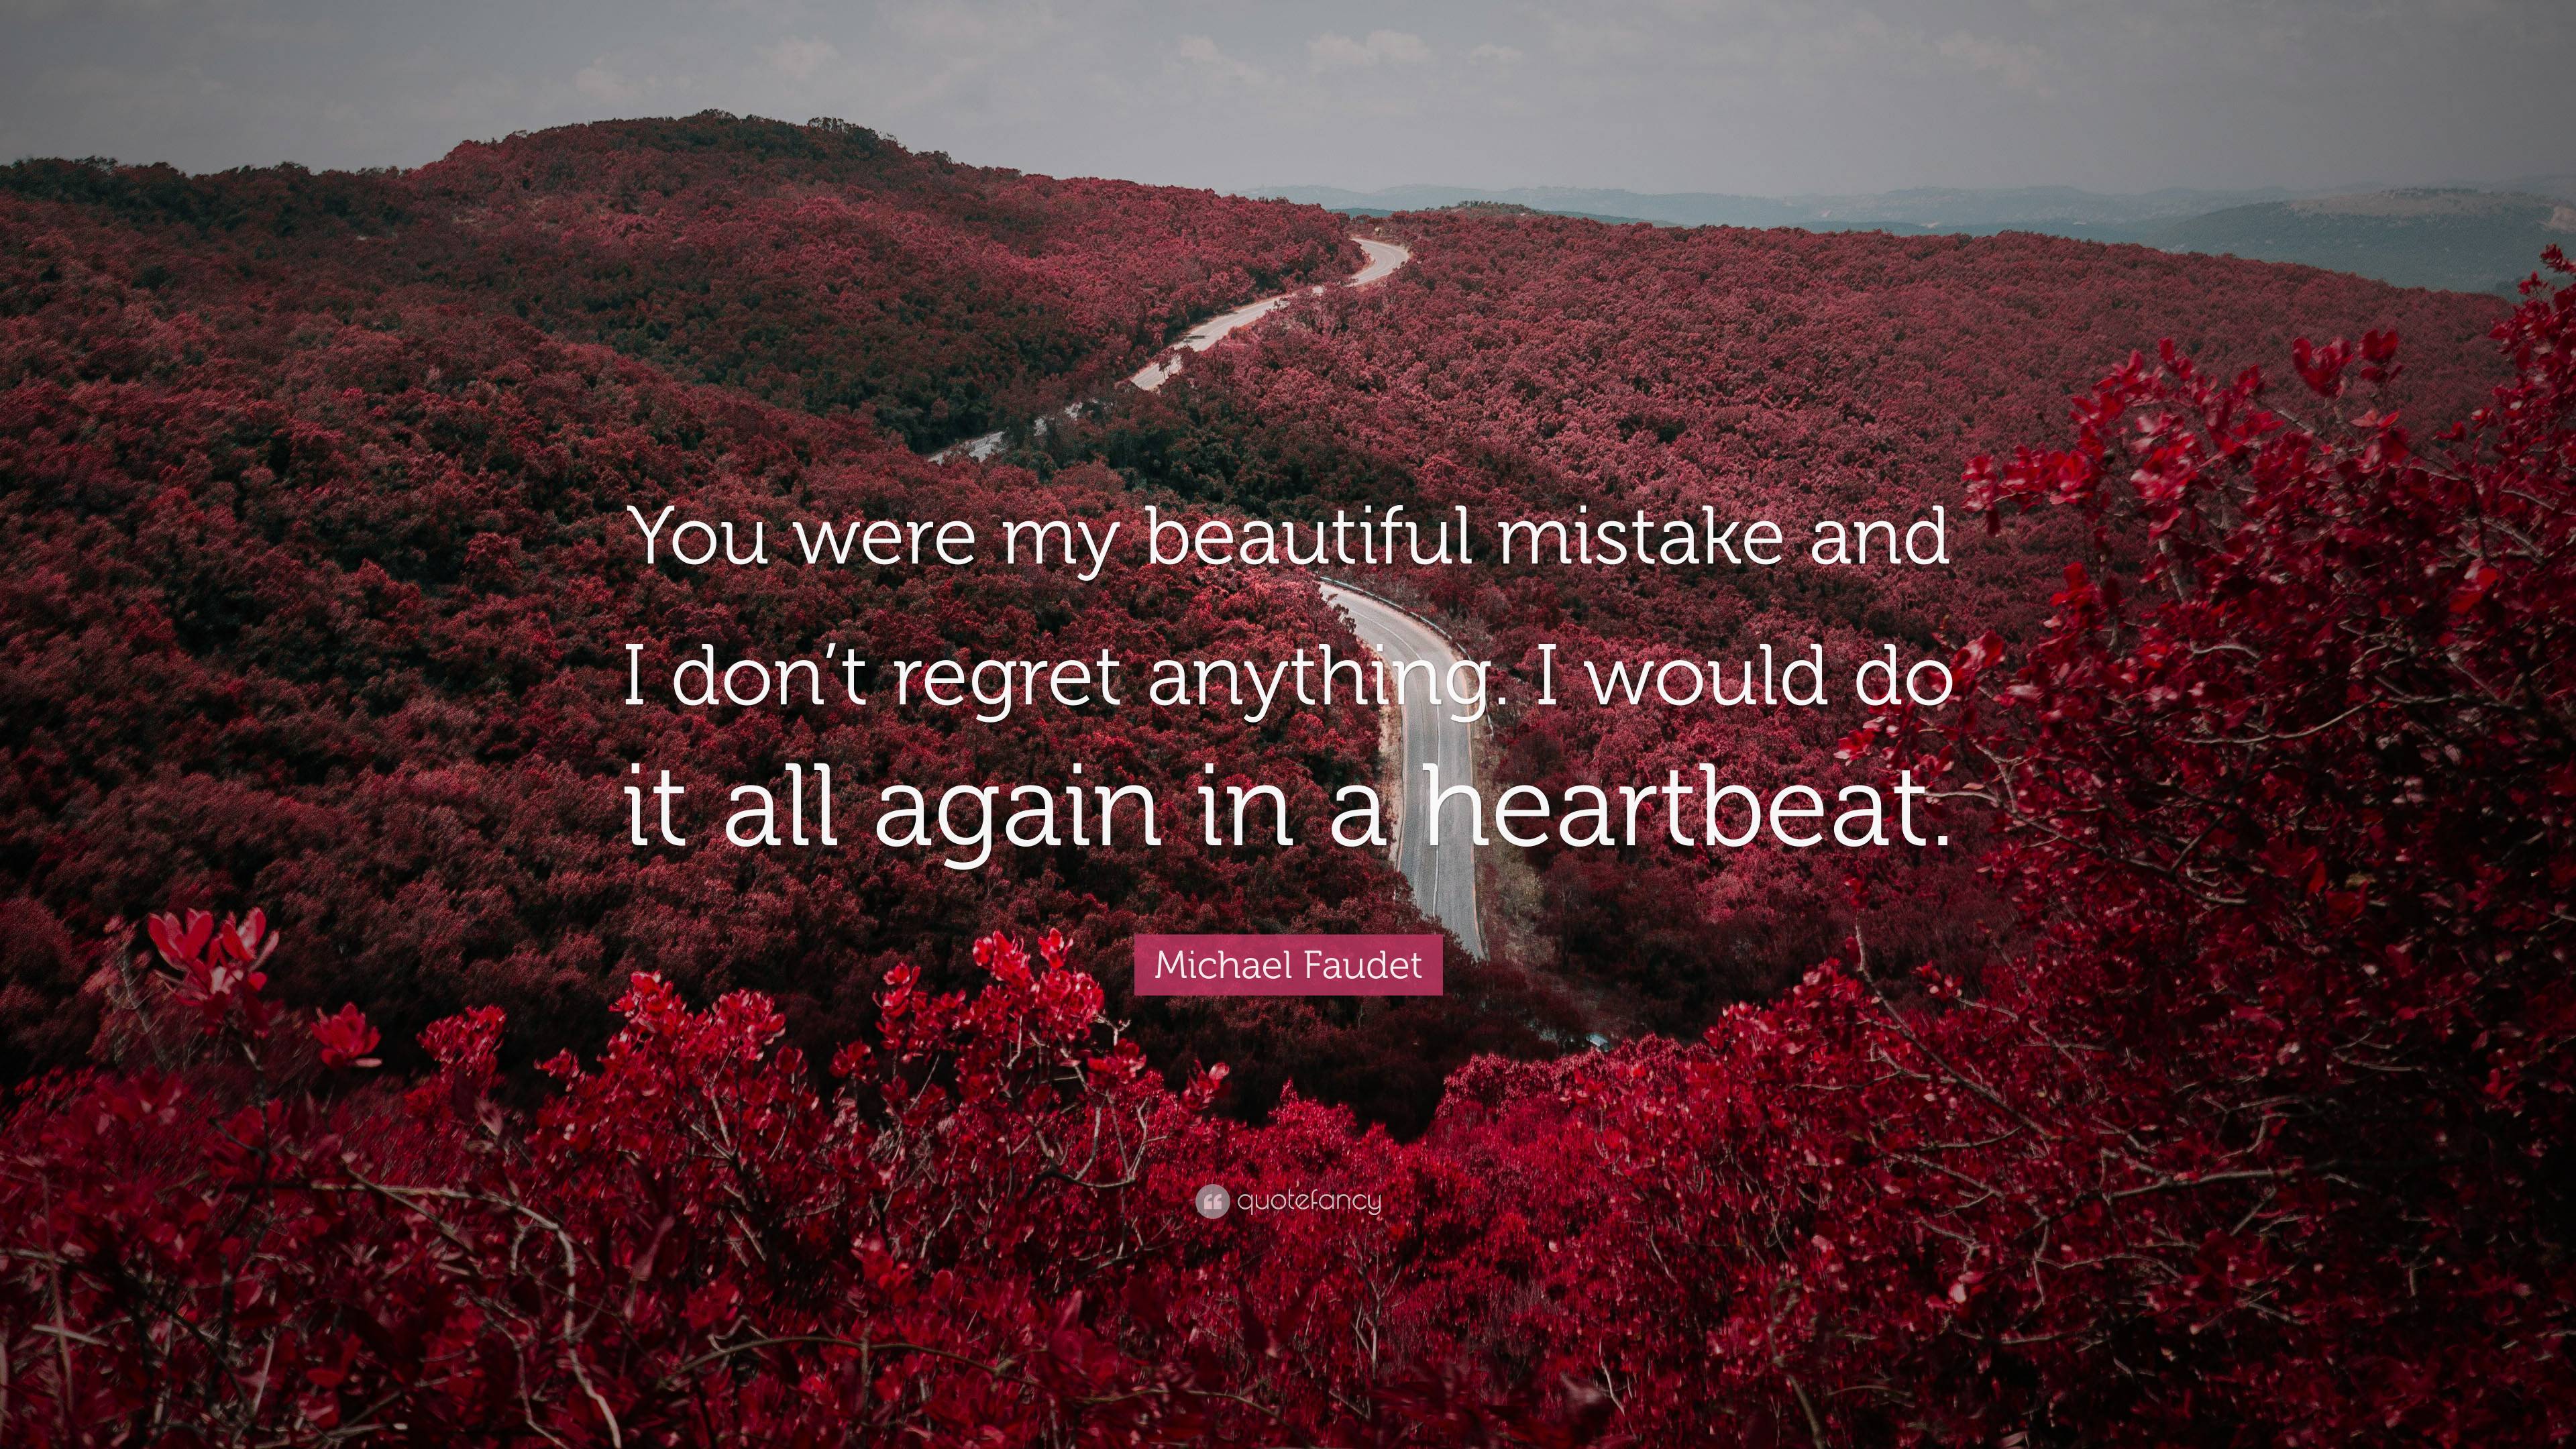 REGRET AND MISTAKE QUOTES TUMBLR  Mistake quotes, Regret quotes